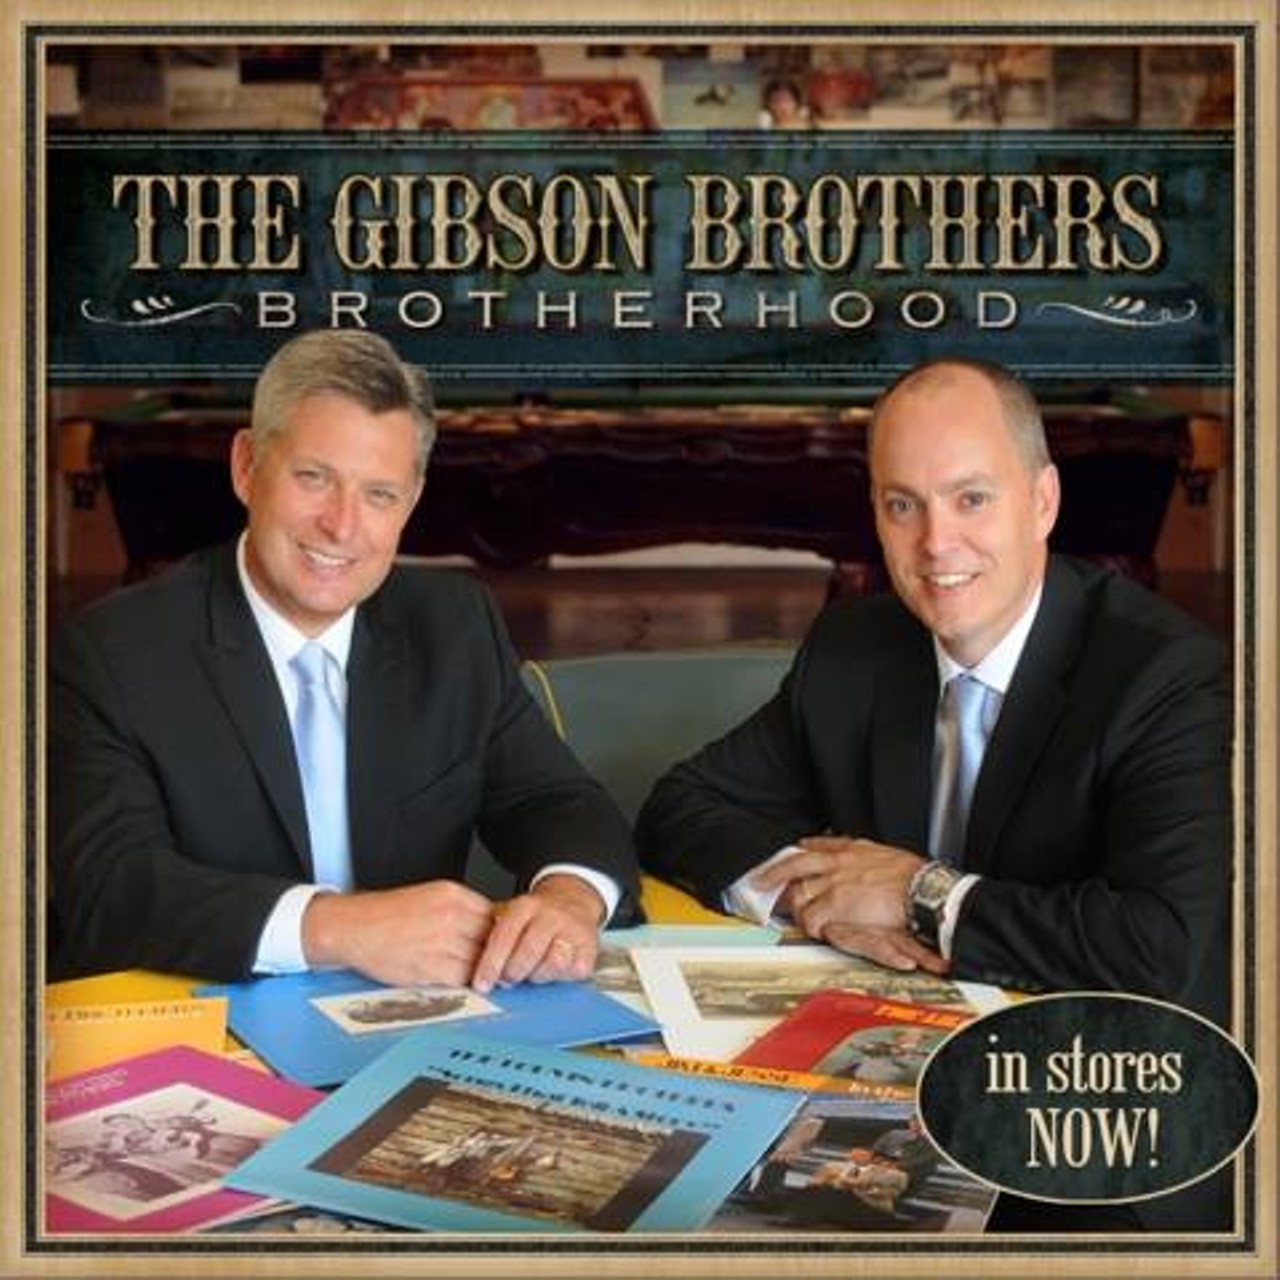 Friday, 9/9
Gibson Brothers 
@ The Ark
Note: this is not the punk-bluegrass Gibson Brothers of Columbus, Ohio, but rather the folk-bluegrass duo of Leigh and Eric Gibson from upstate New York. These incredibly talented dudes have written scores of new original songs, which are already entering the wider repertoire of this still-vital, high lonesome sound. Augmenting that, the two just released a full-length called Brotherhood, which explores the realm of classic bluegrass brother duet songs. Do not miss this if you even remotely like bluegrass music.
Starts at 8 p.m.; 316 S. Main St., Ann Arbor; theark.org; $20.